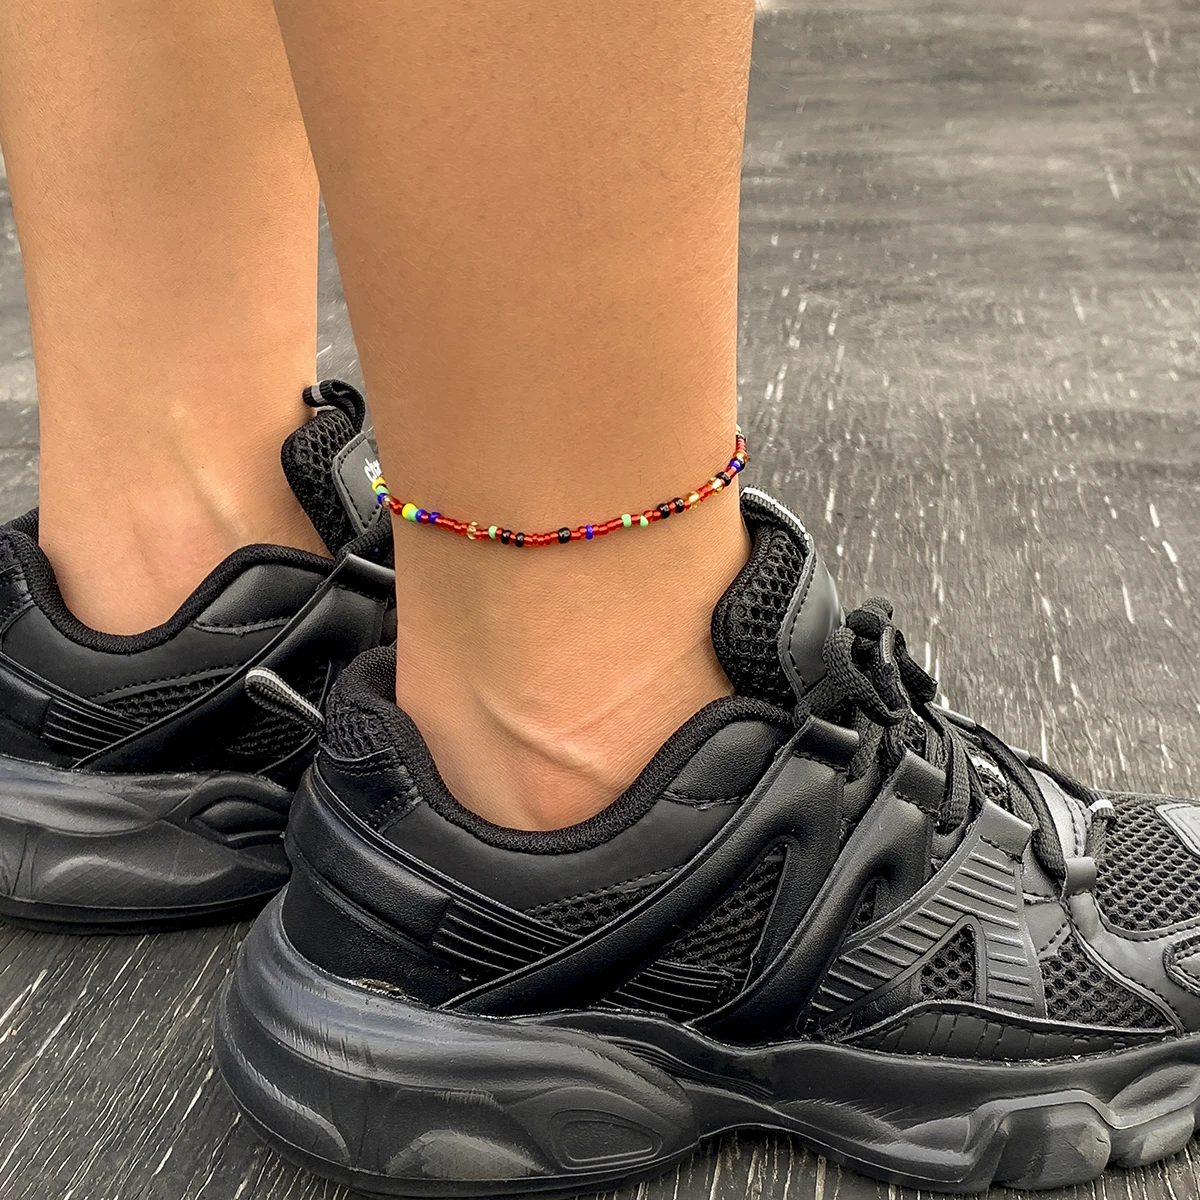 

IngeSight.Z Colorful Rainbow Seed Beaded Chain Anklets Bracelets Summer Beach Anklets Barefoot Sandals On Foot Ankle Jewelry